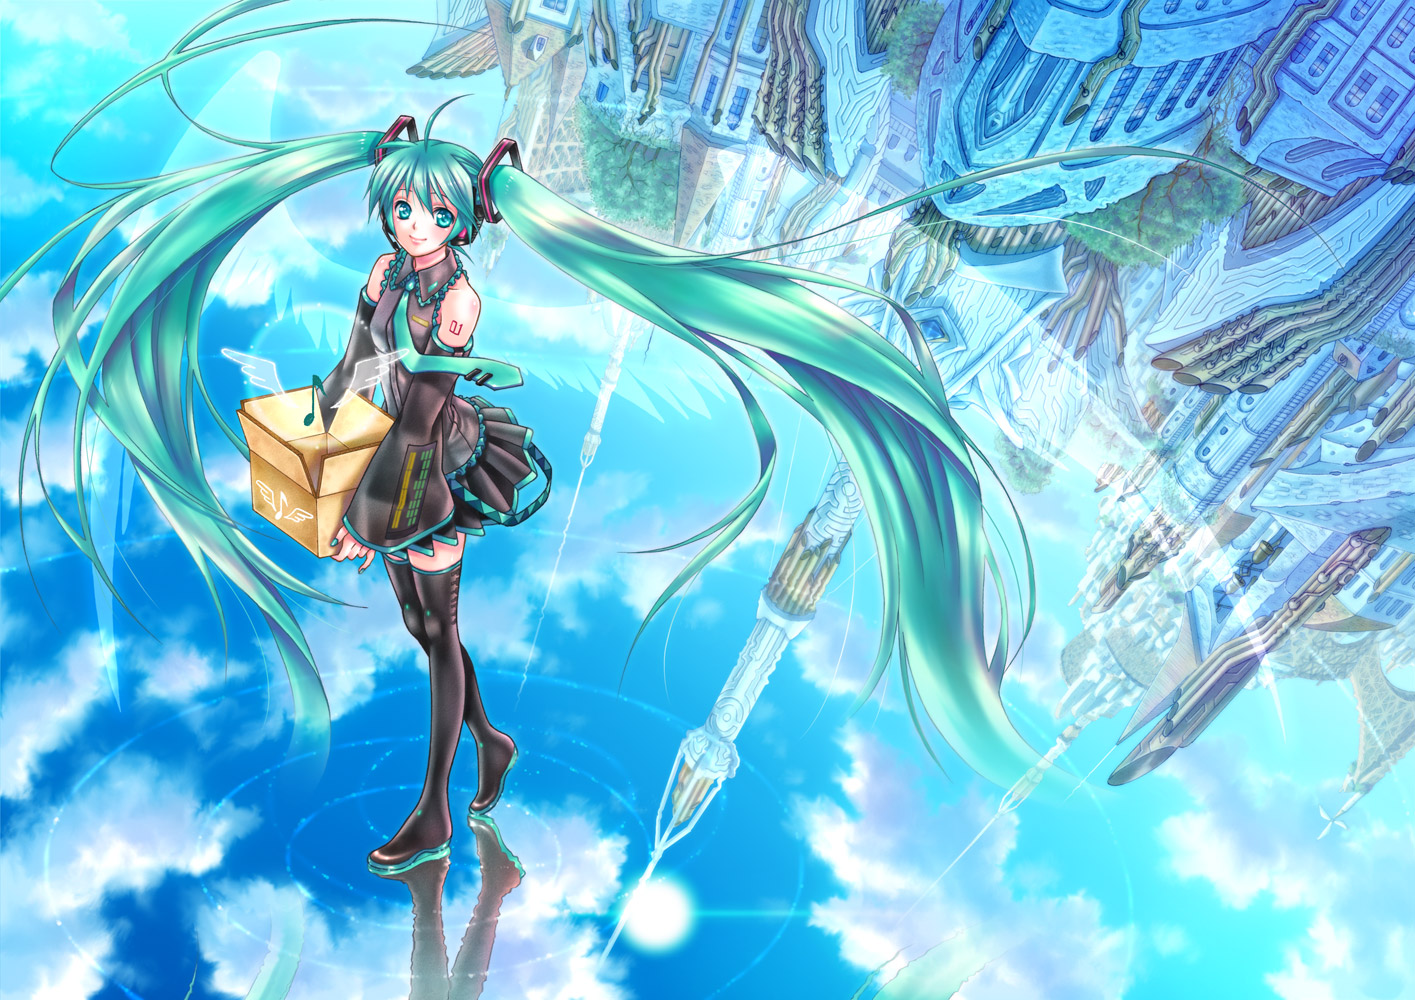 Hatsune Miku Joins Orchestra And Classic Anime Composer For